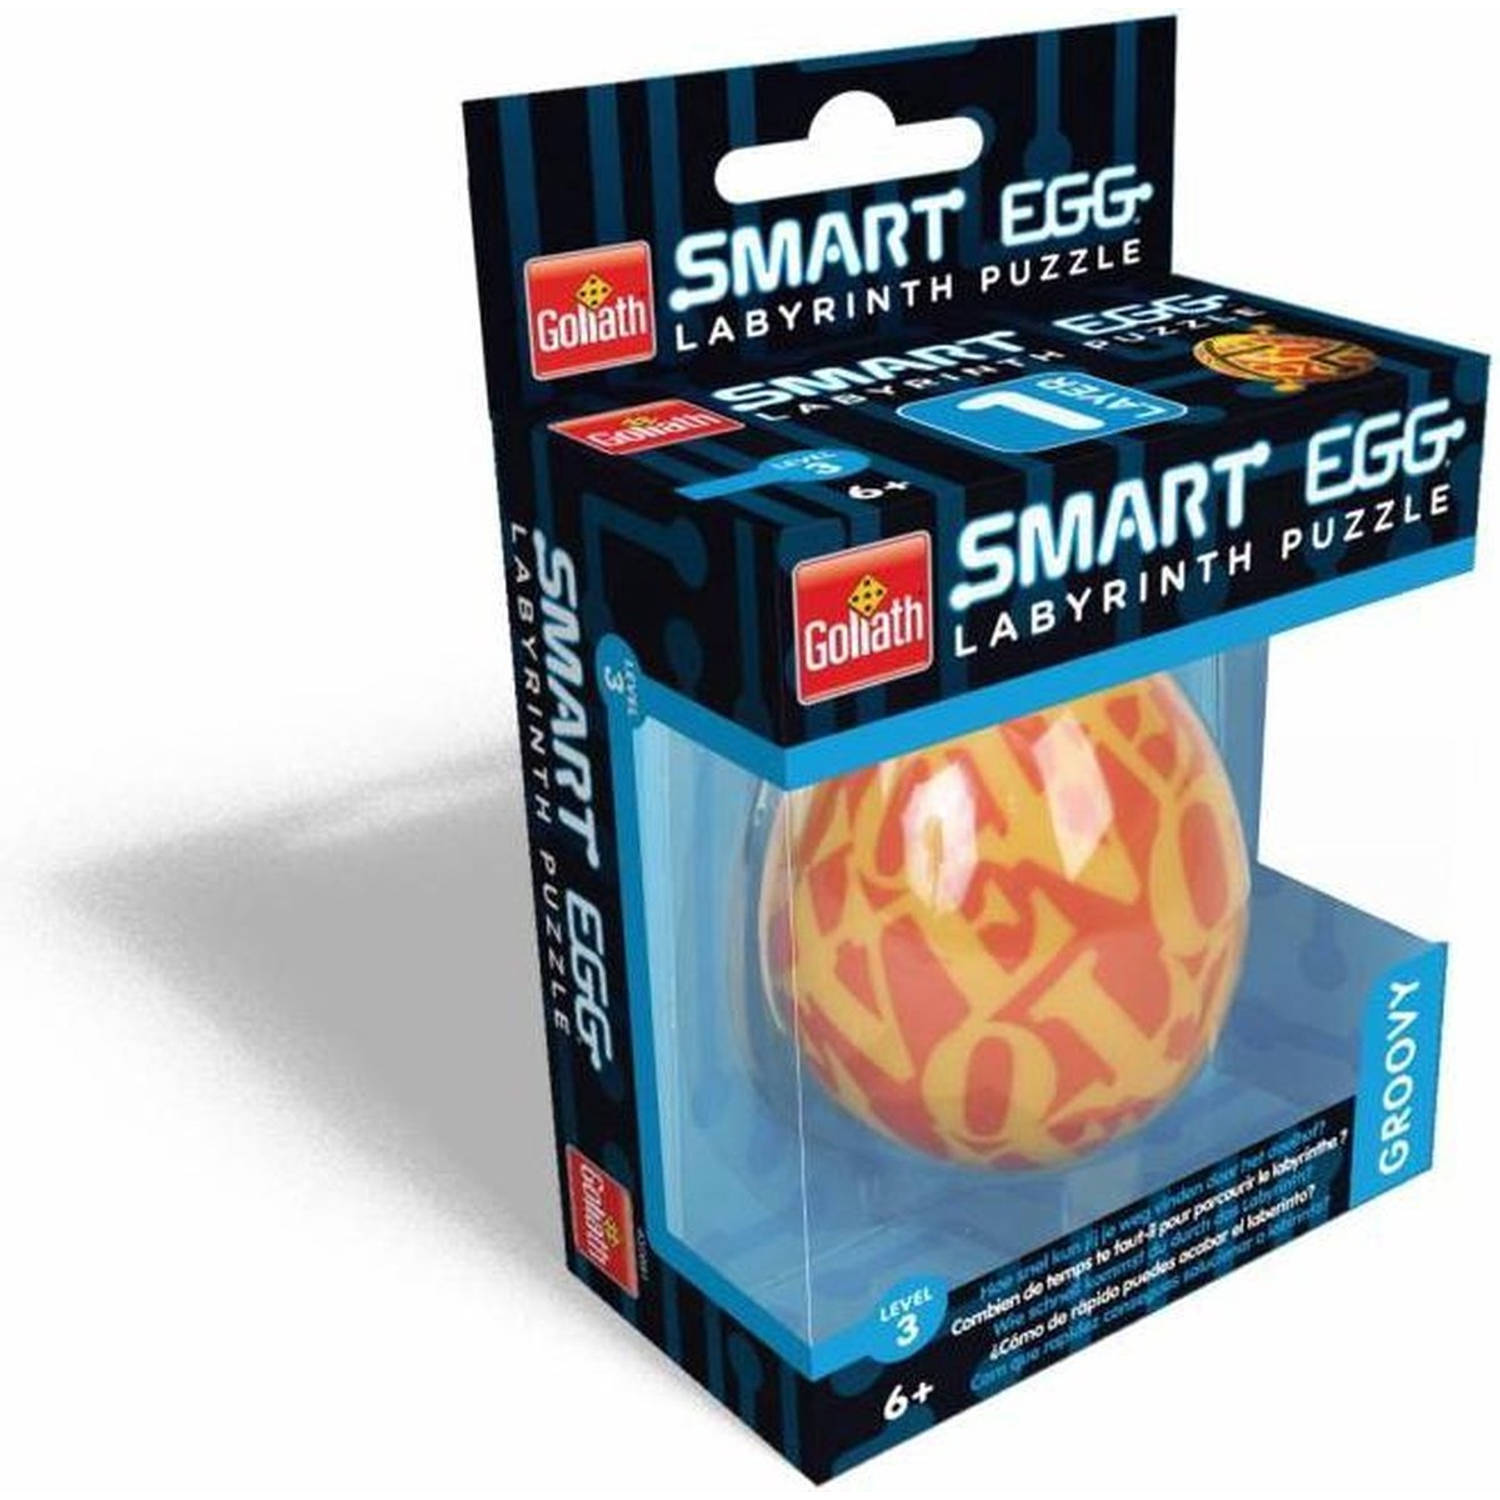 Goliath Smart Egg Groovy Labyrinth Puzzle - Rood/ Geel